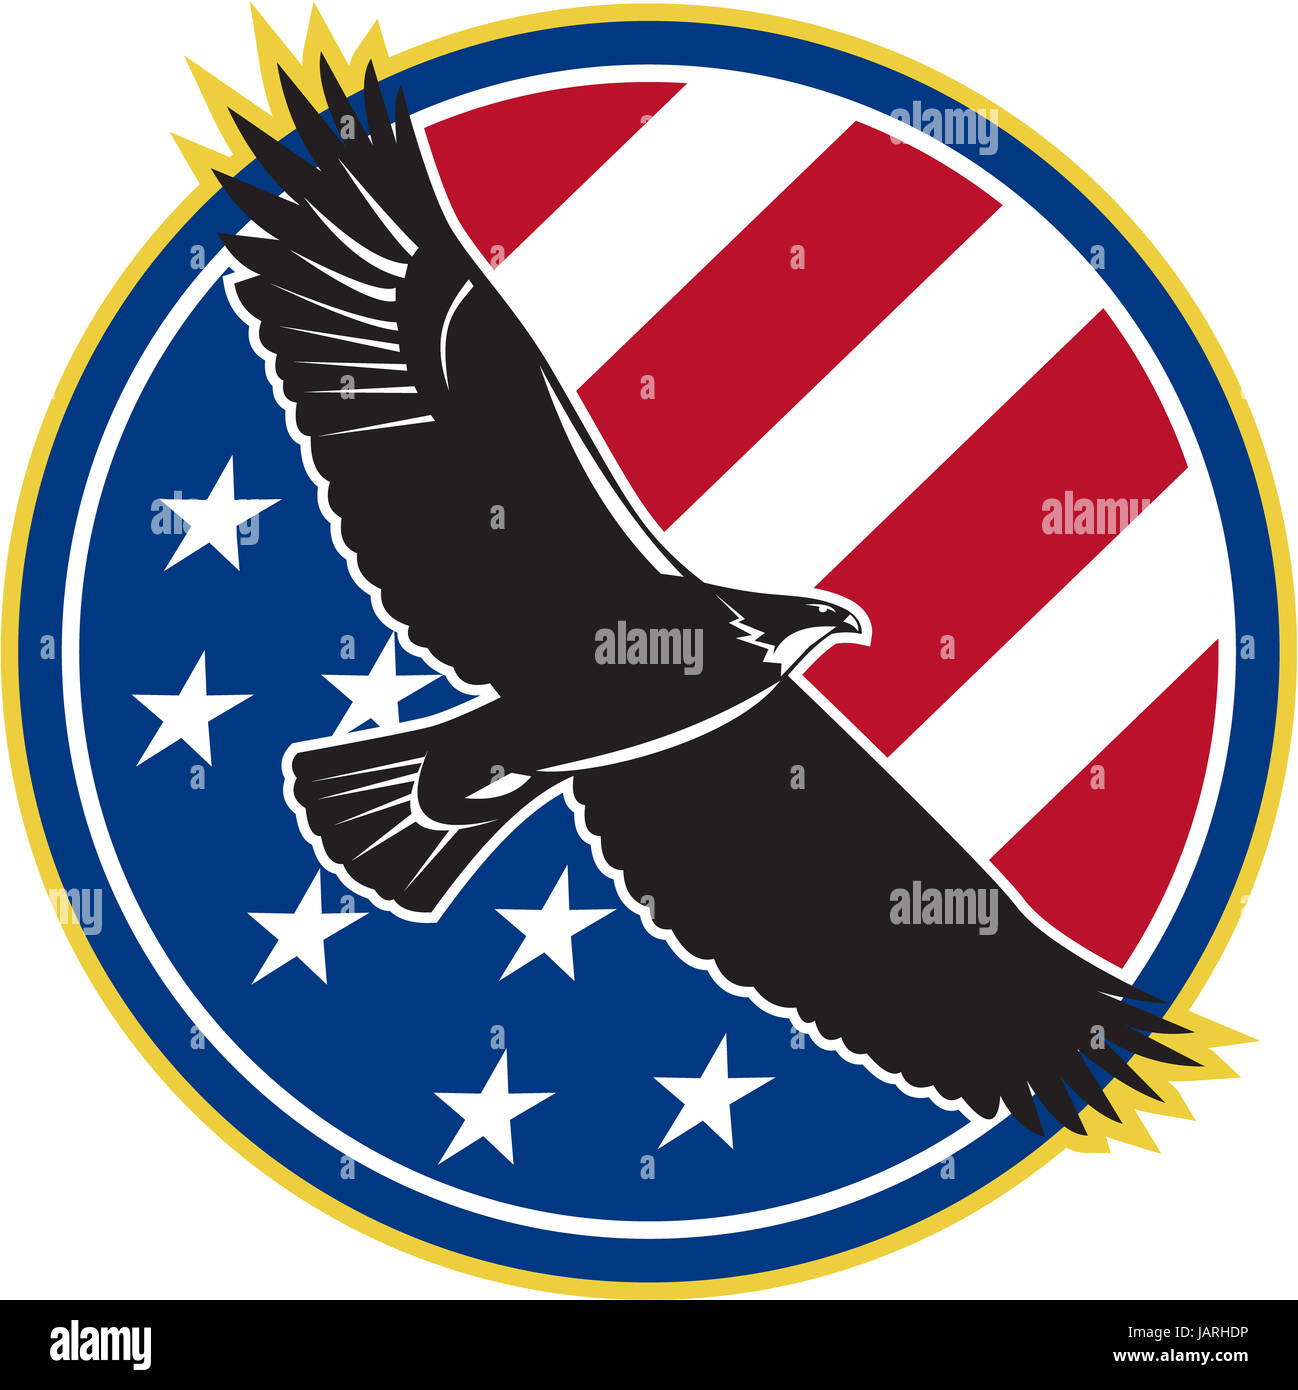 Illustration of a bald eagle soaring flying with american USA stars stripes flag set inside circle on isolated background done in retro style. Stock Photo